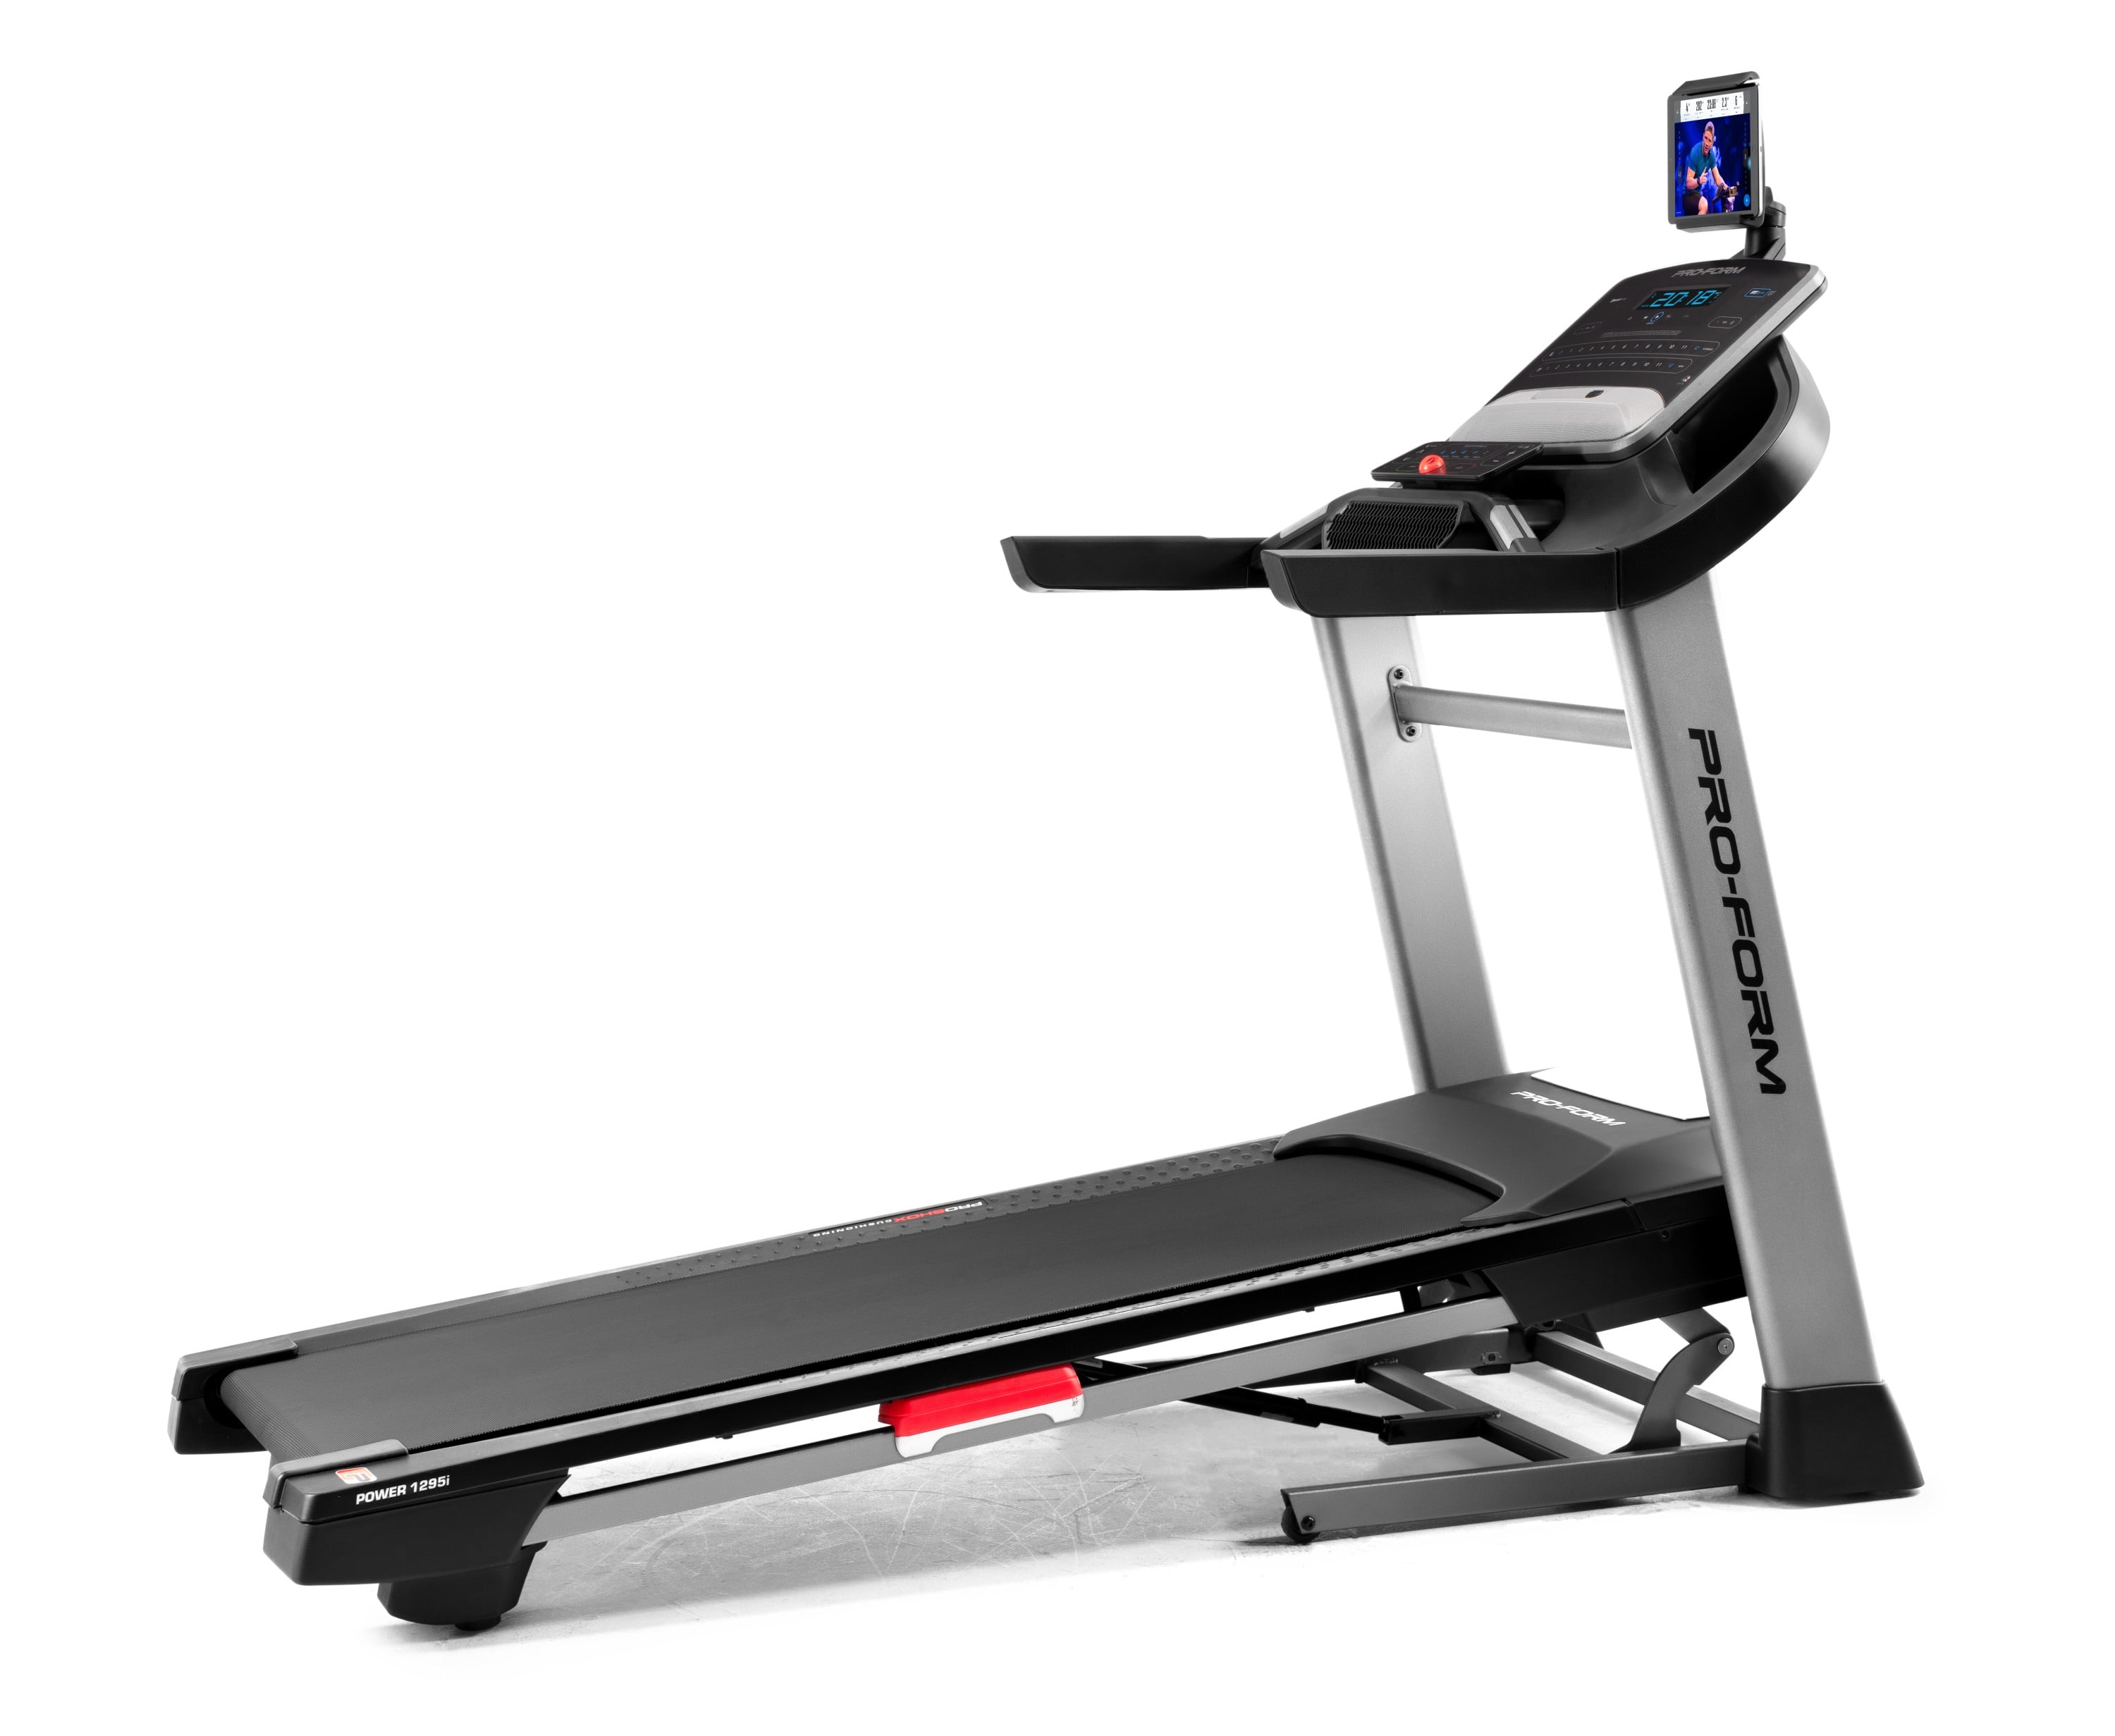 ifit activation code in treadmill